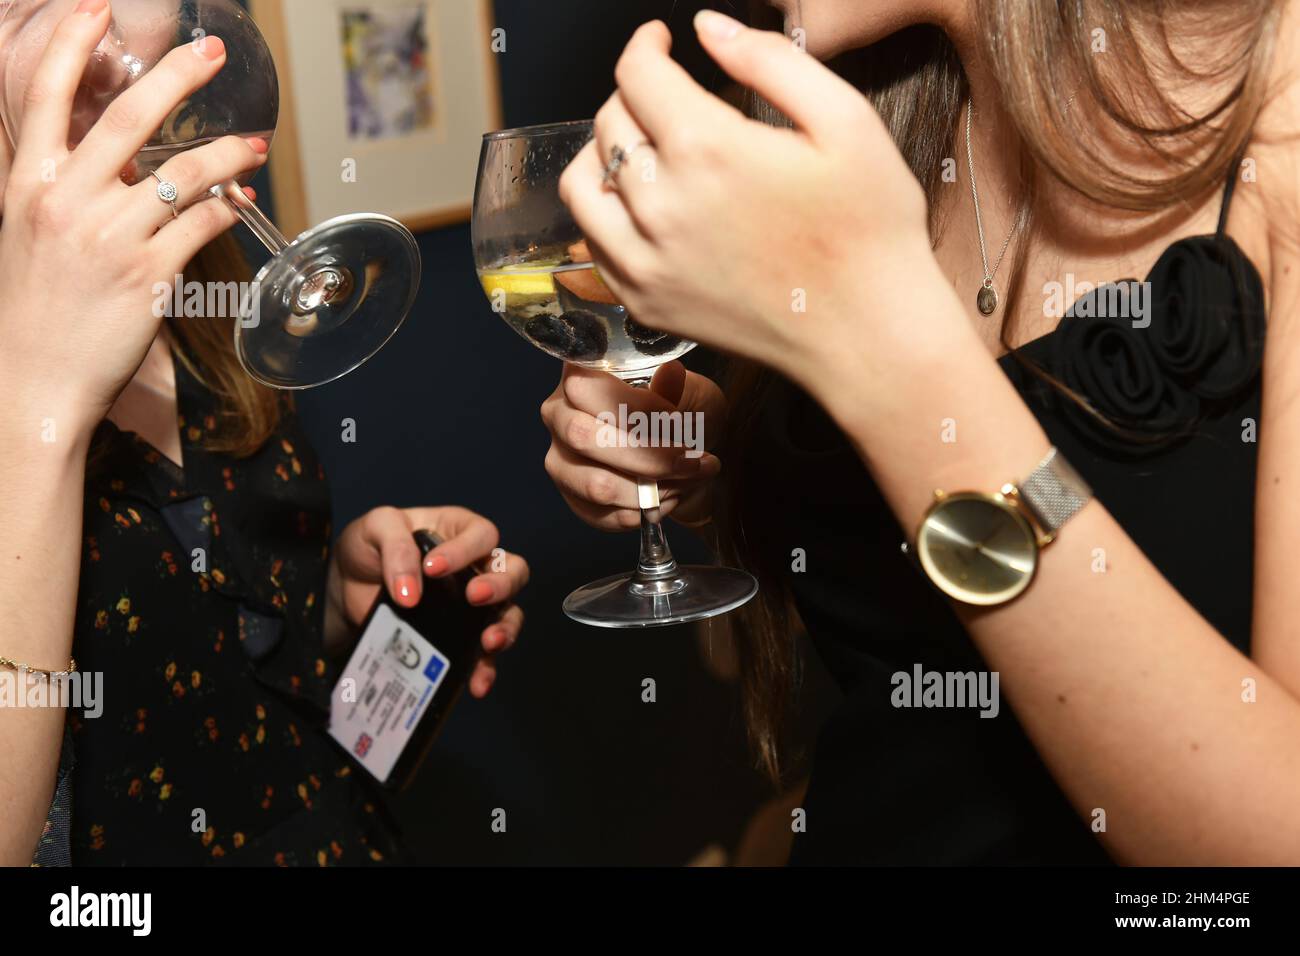 Young woman drink gin on a night out, with Age ID Stock Photo